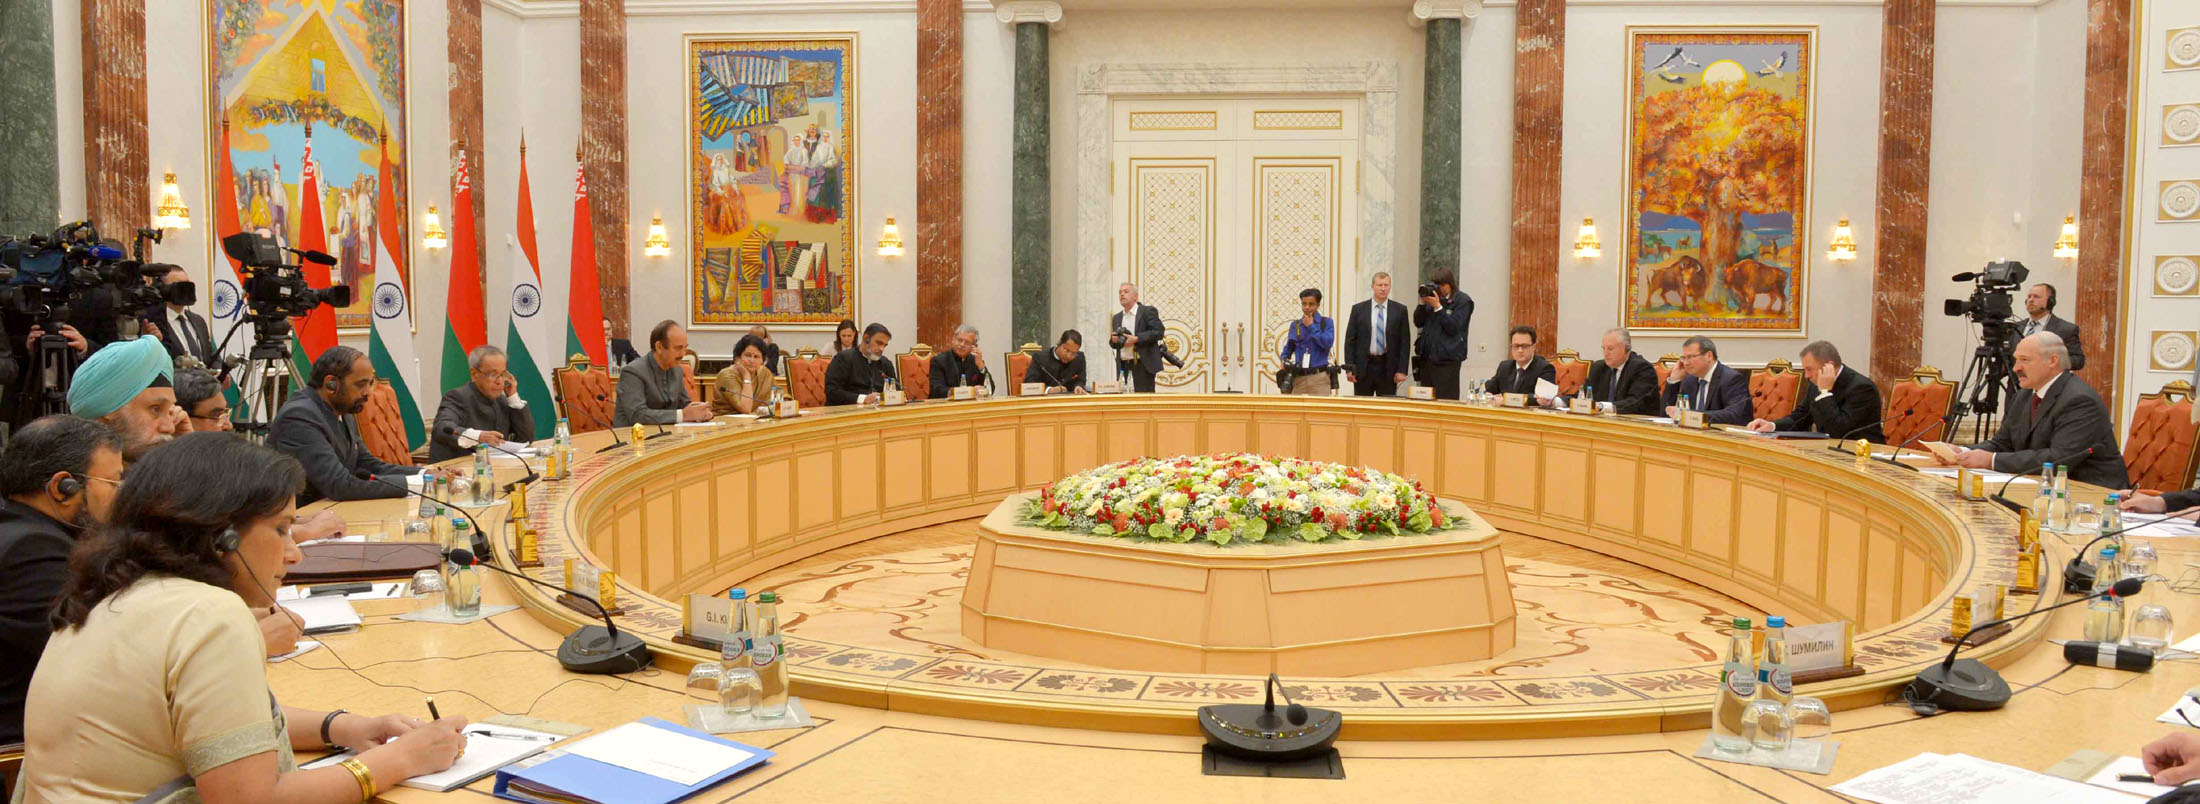 The President, Pranab Mukherjee and the President of the Republic of Belarus,Alexander Lukashenko at a delegation level talks, at Palace of Independence, in Minsk, Belarus on June 03, 2015. 